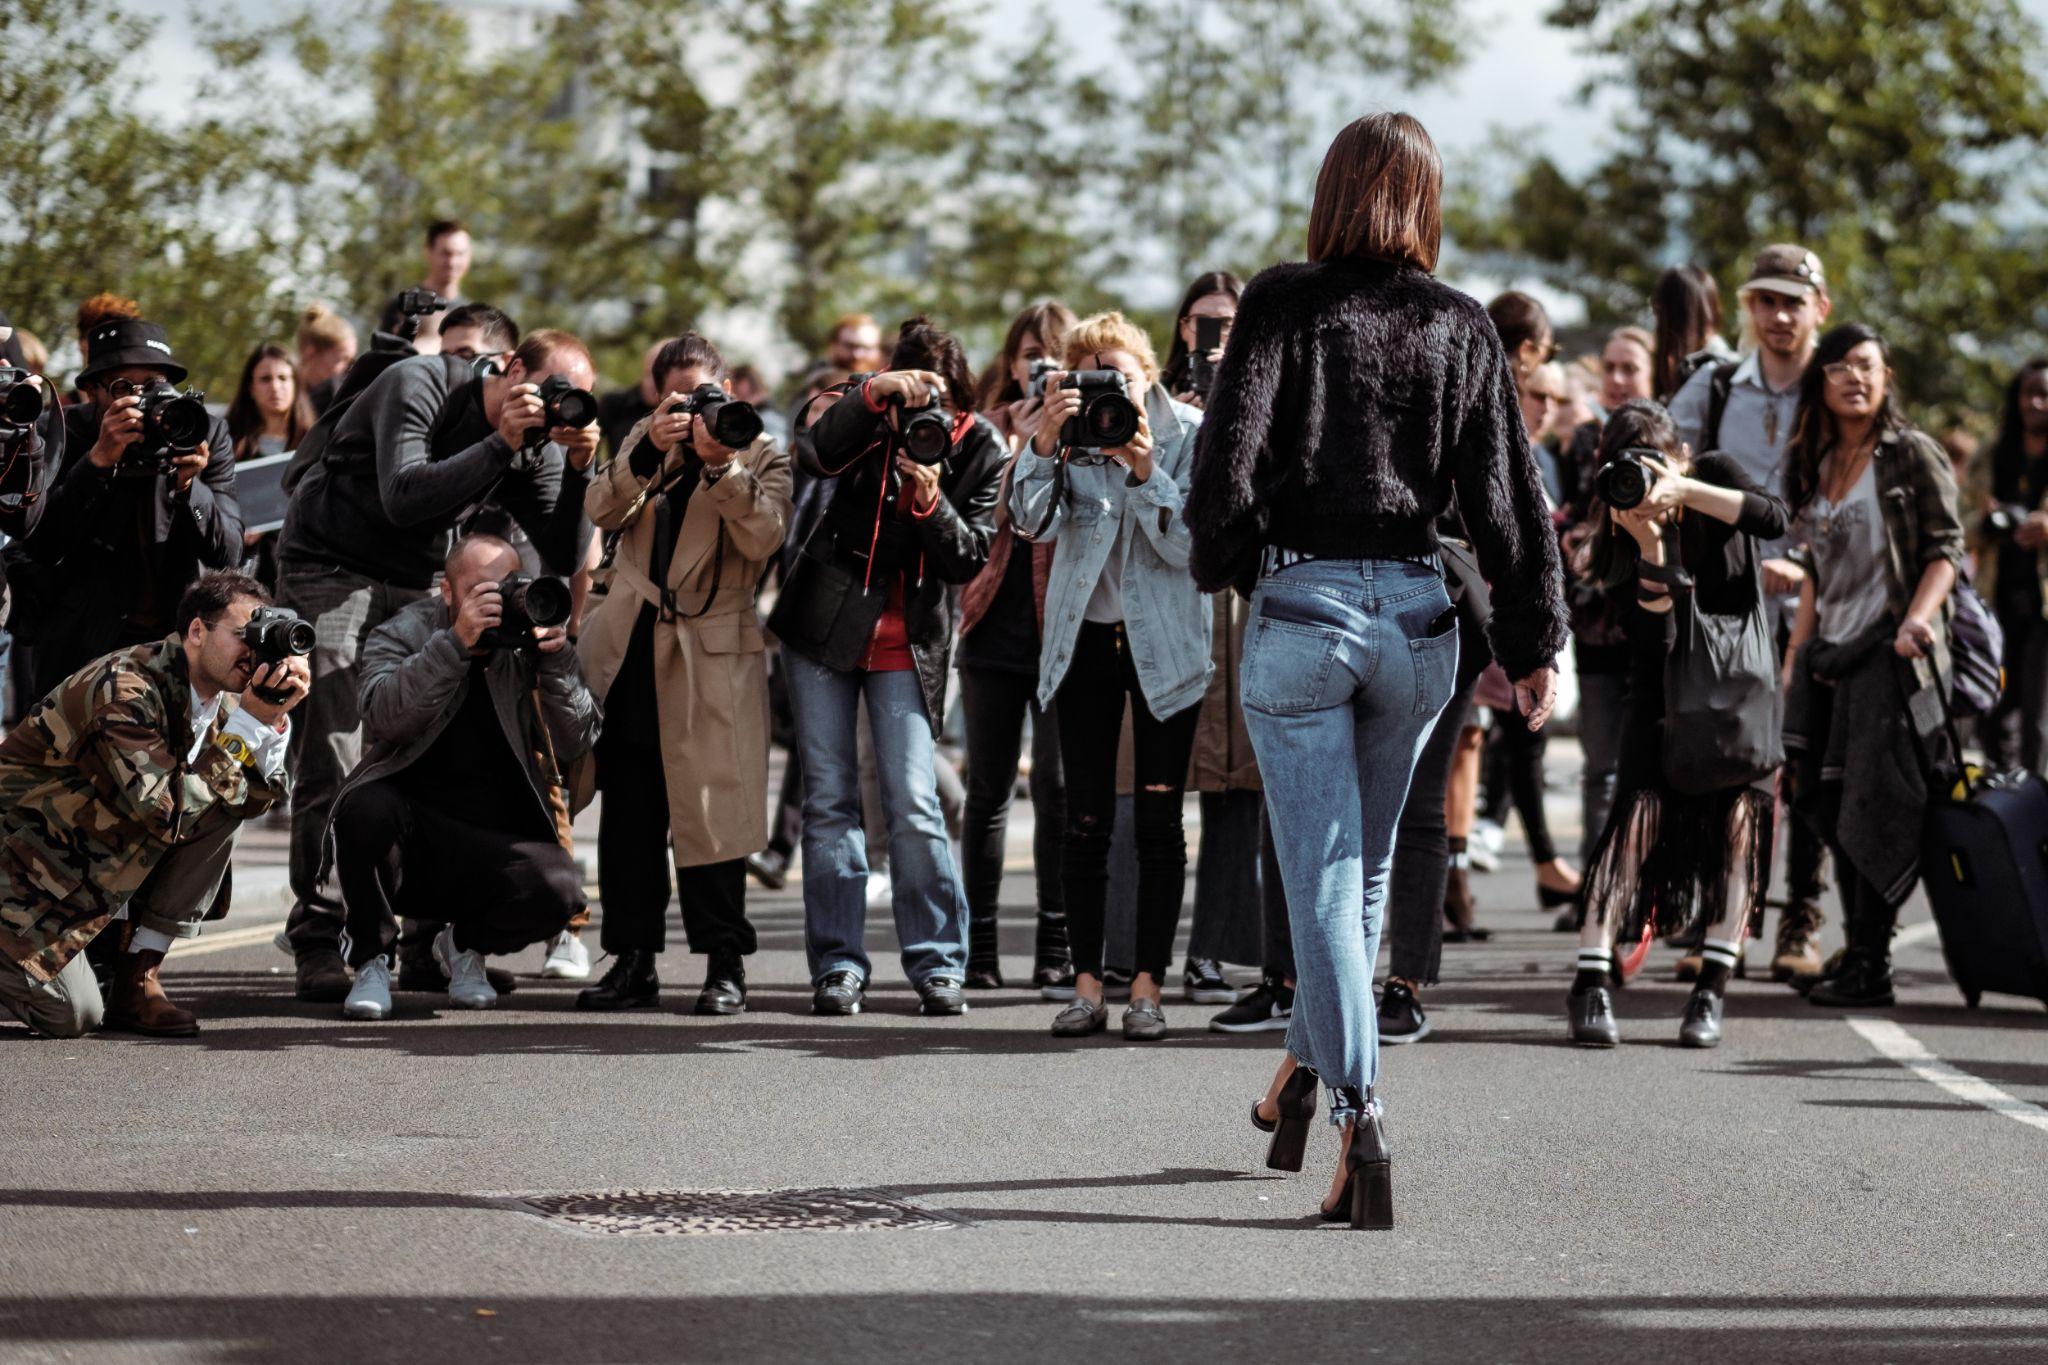 How to Attend and Survive London Fashion Week?